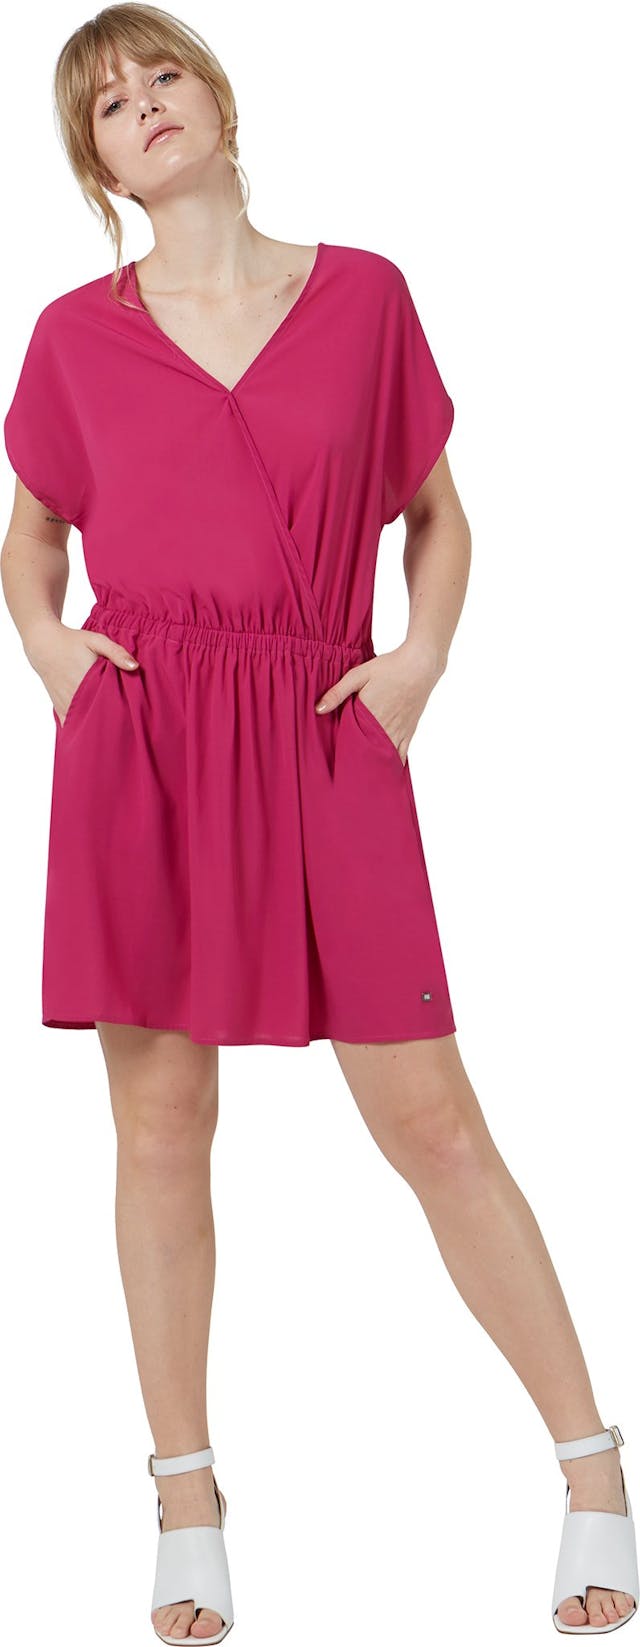 Product image for Diani Dress - Women's